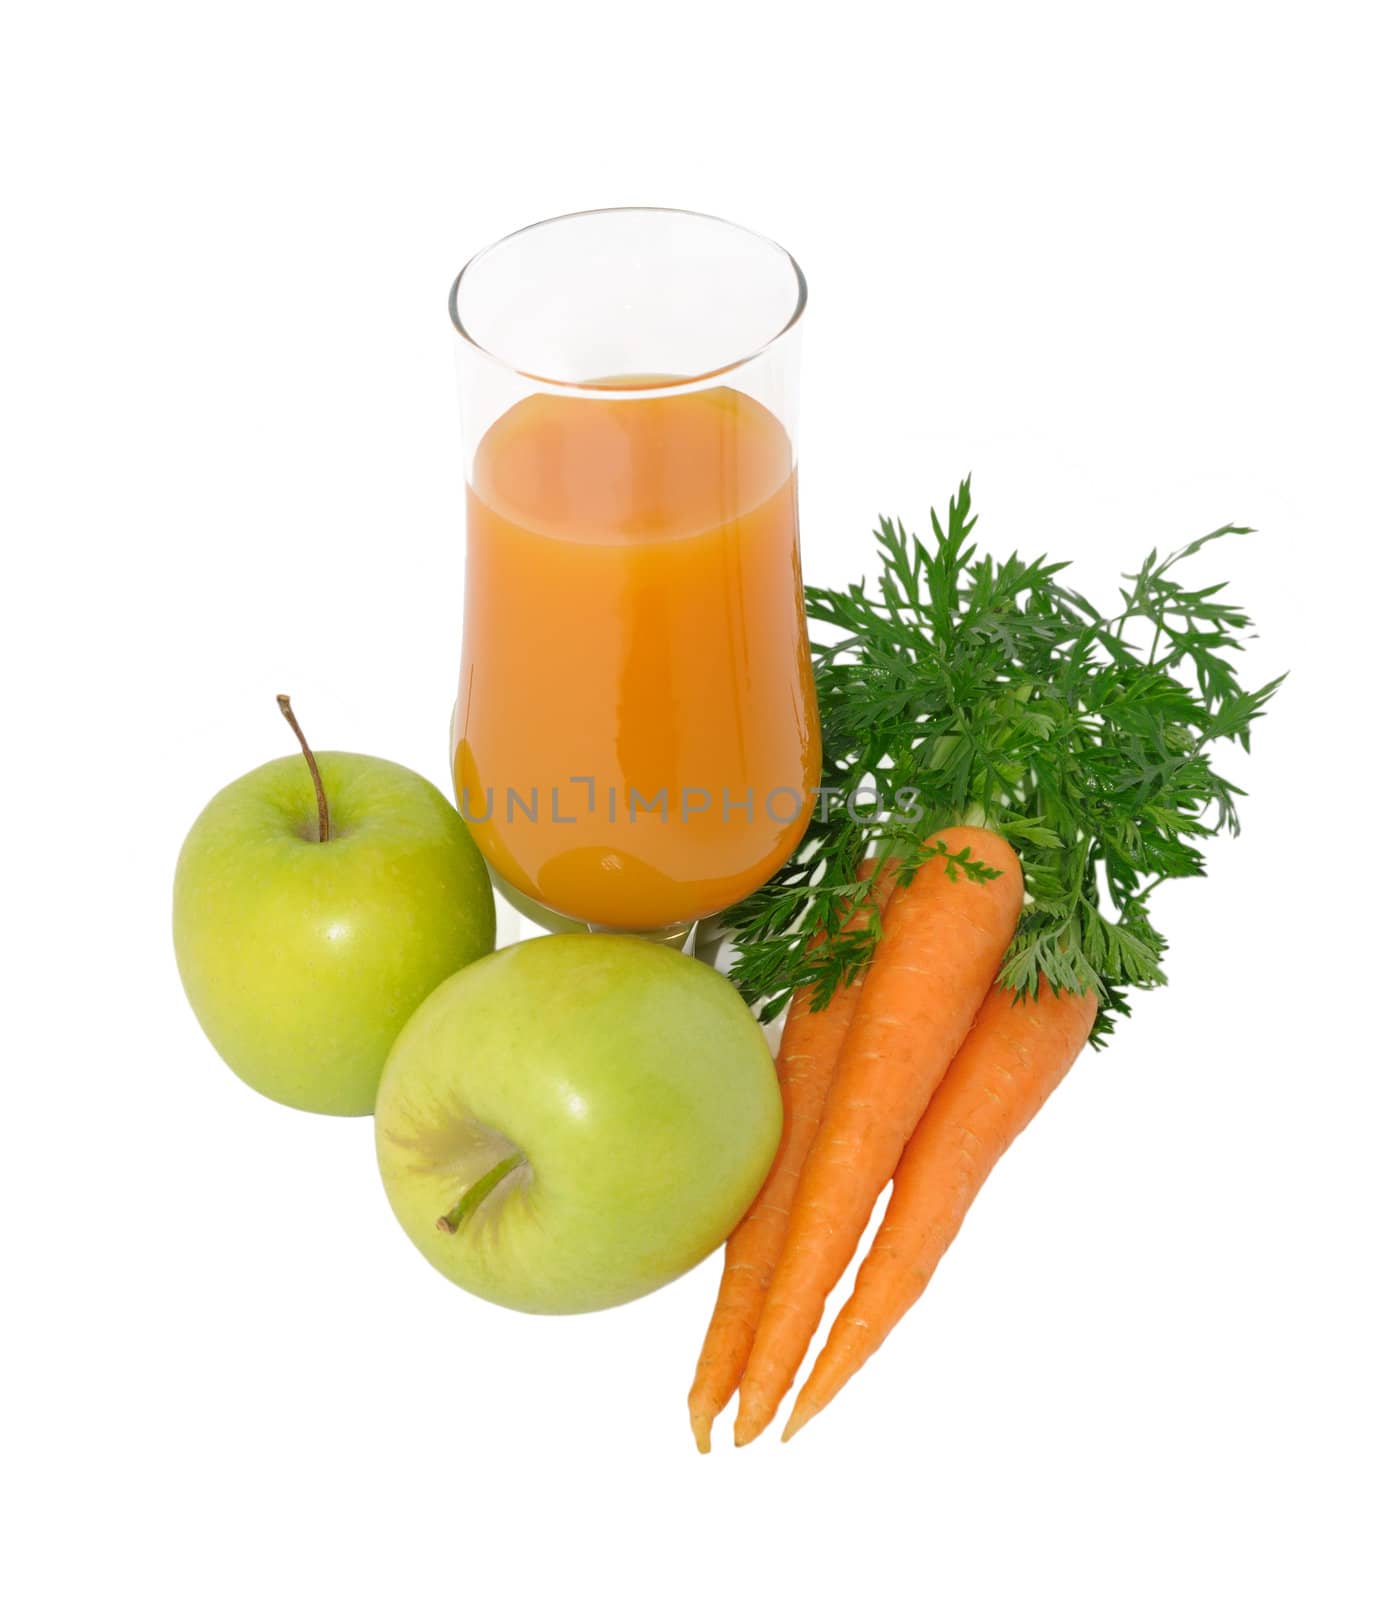 Carrot juice with apples and carrots on a white background